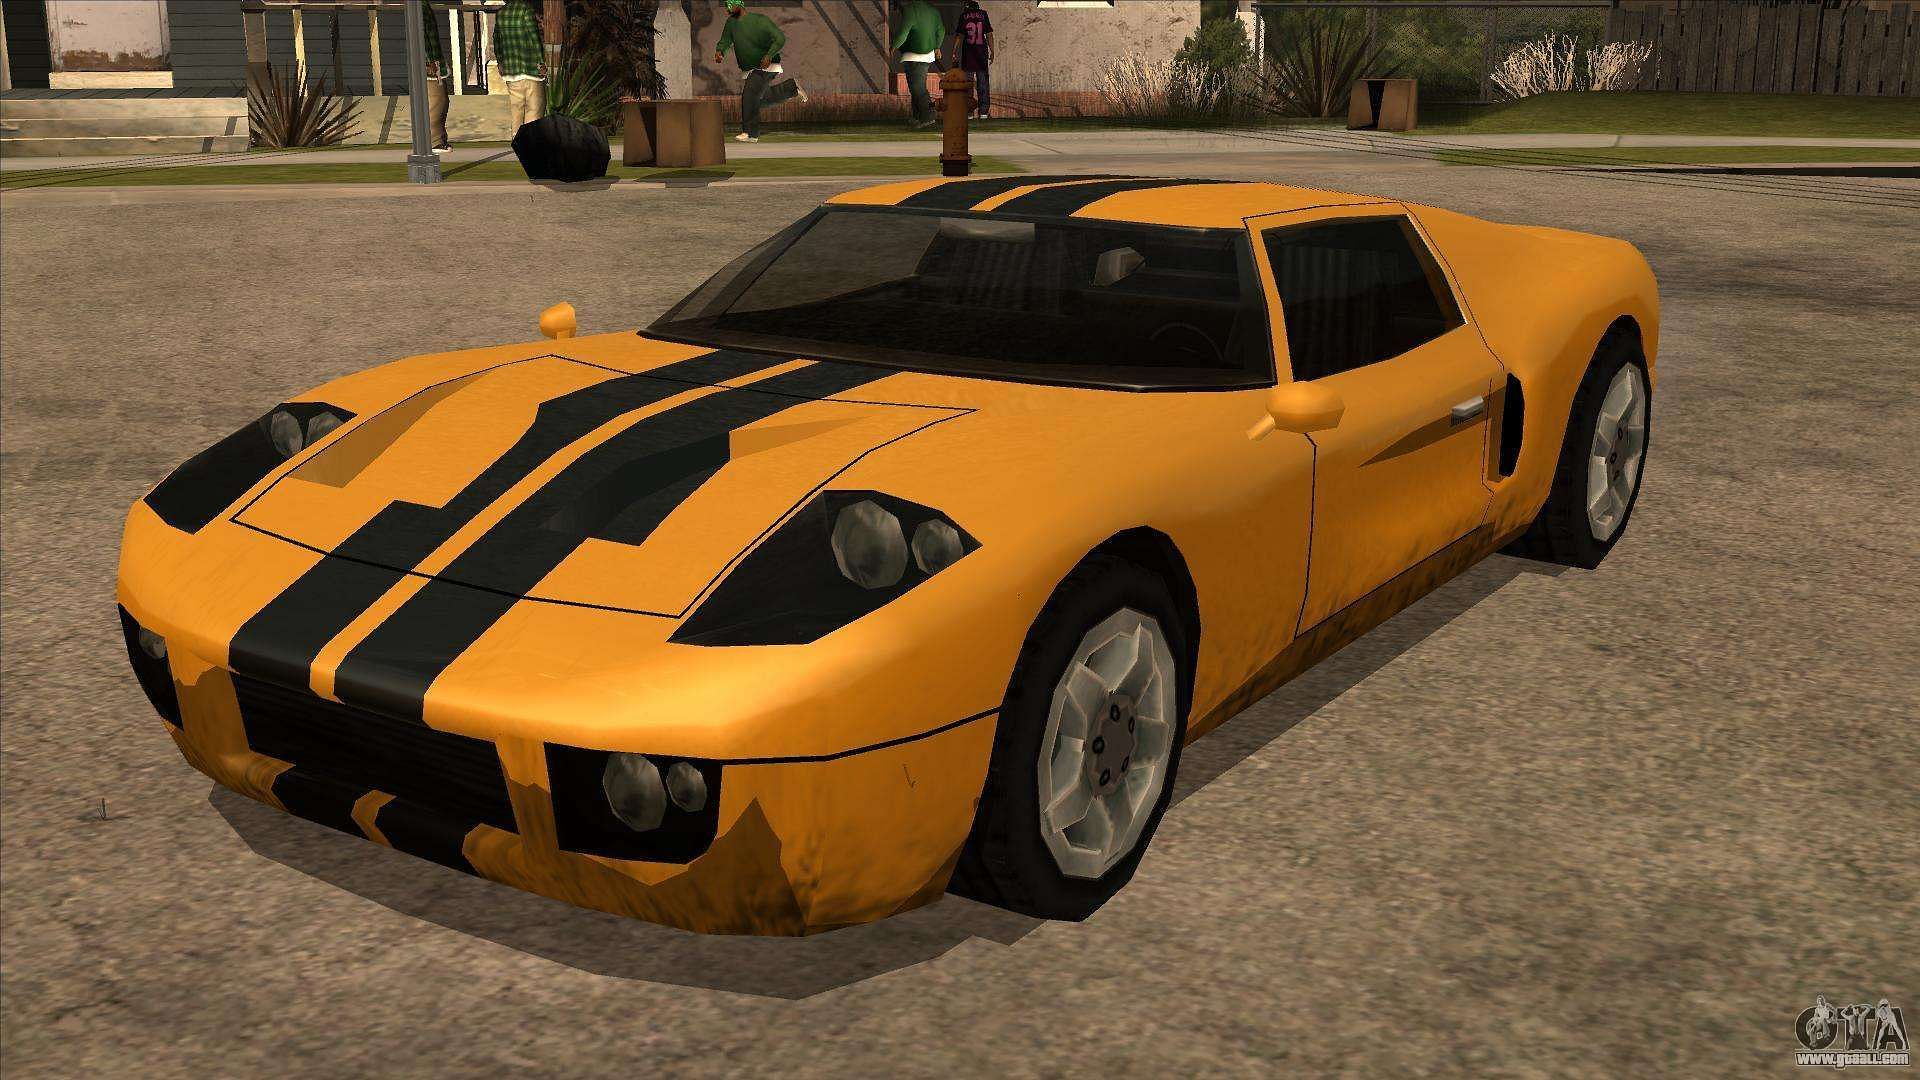 5 cars from GTA San Andreas that will be more fun to drive in the remastered GTA Trilogy (Image via GTAALL.com)